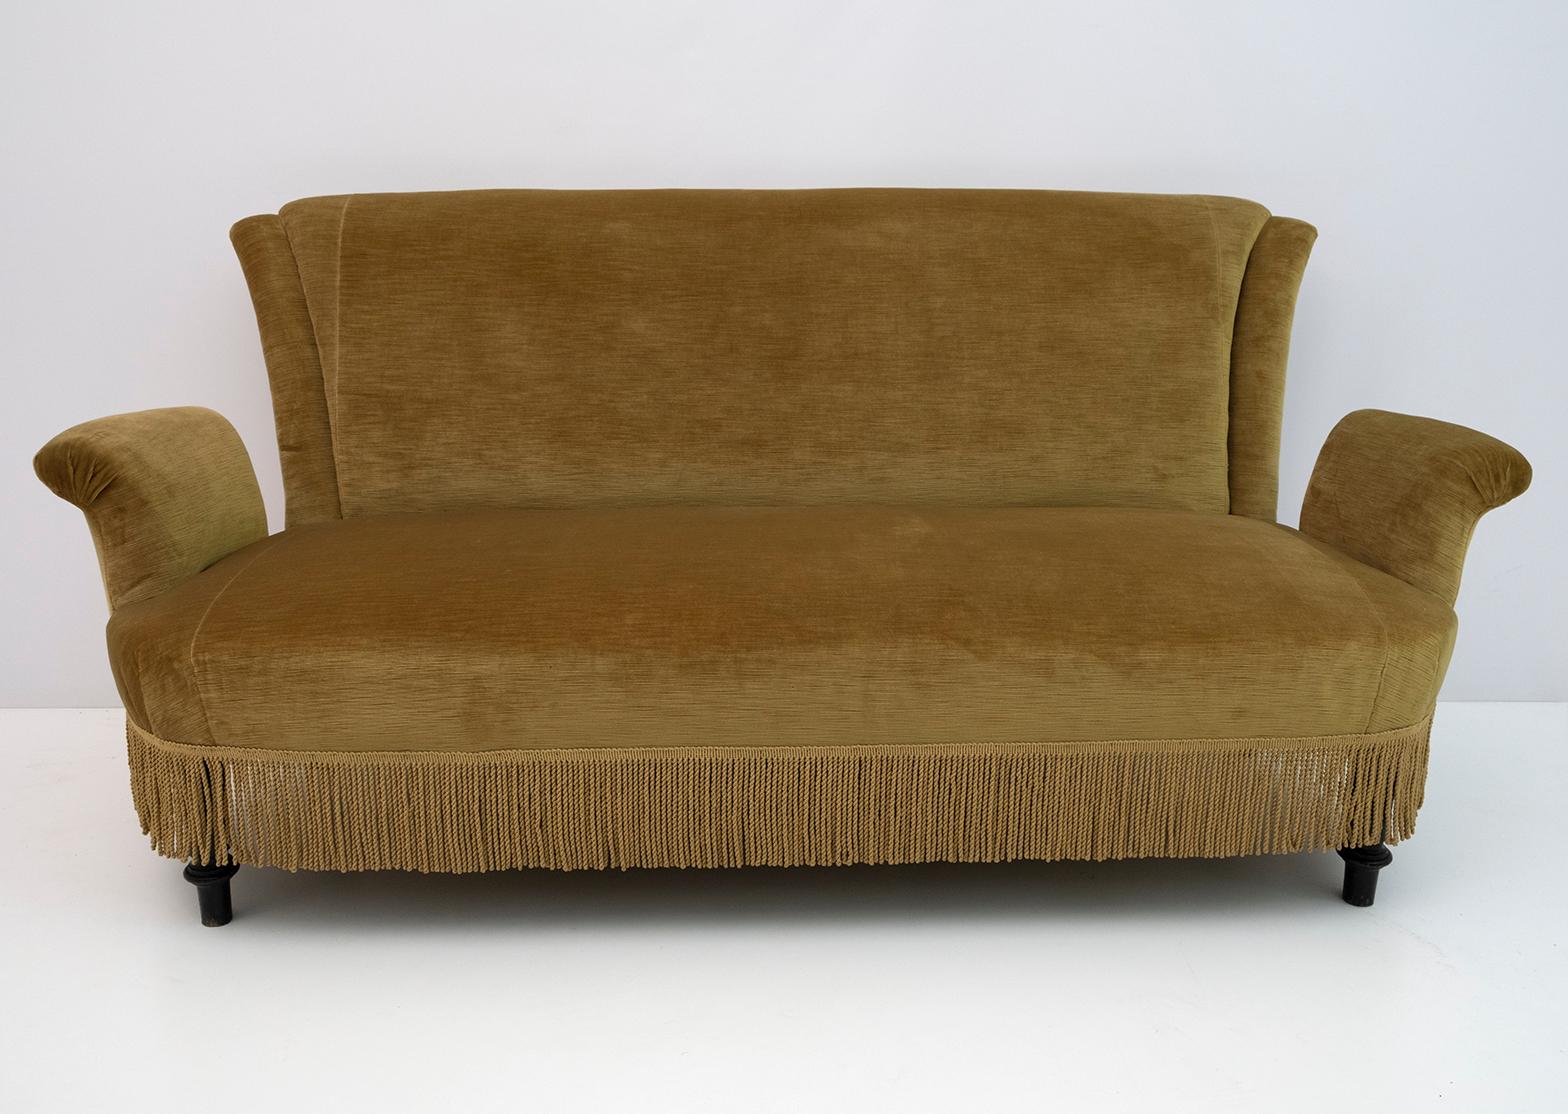 French sofa from the 19th century, Napoleon III period, the upholstery was redone in velvet in the 1960s, normal wear but in very good condition, France, 1870s.